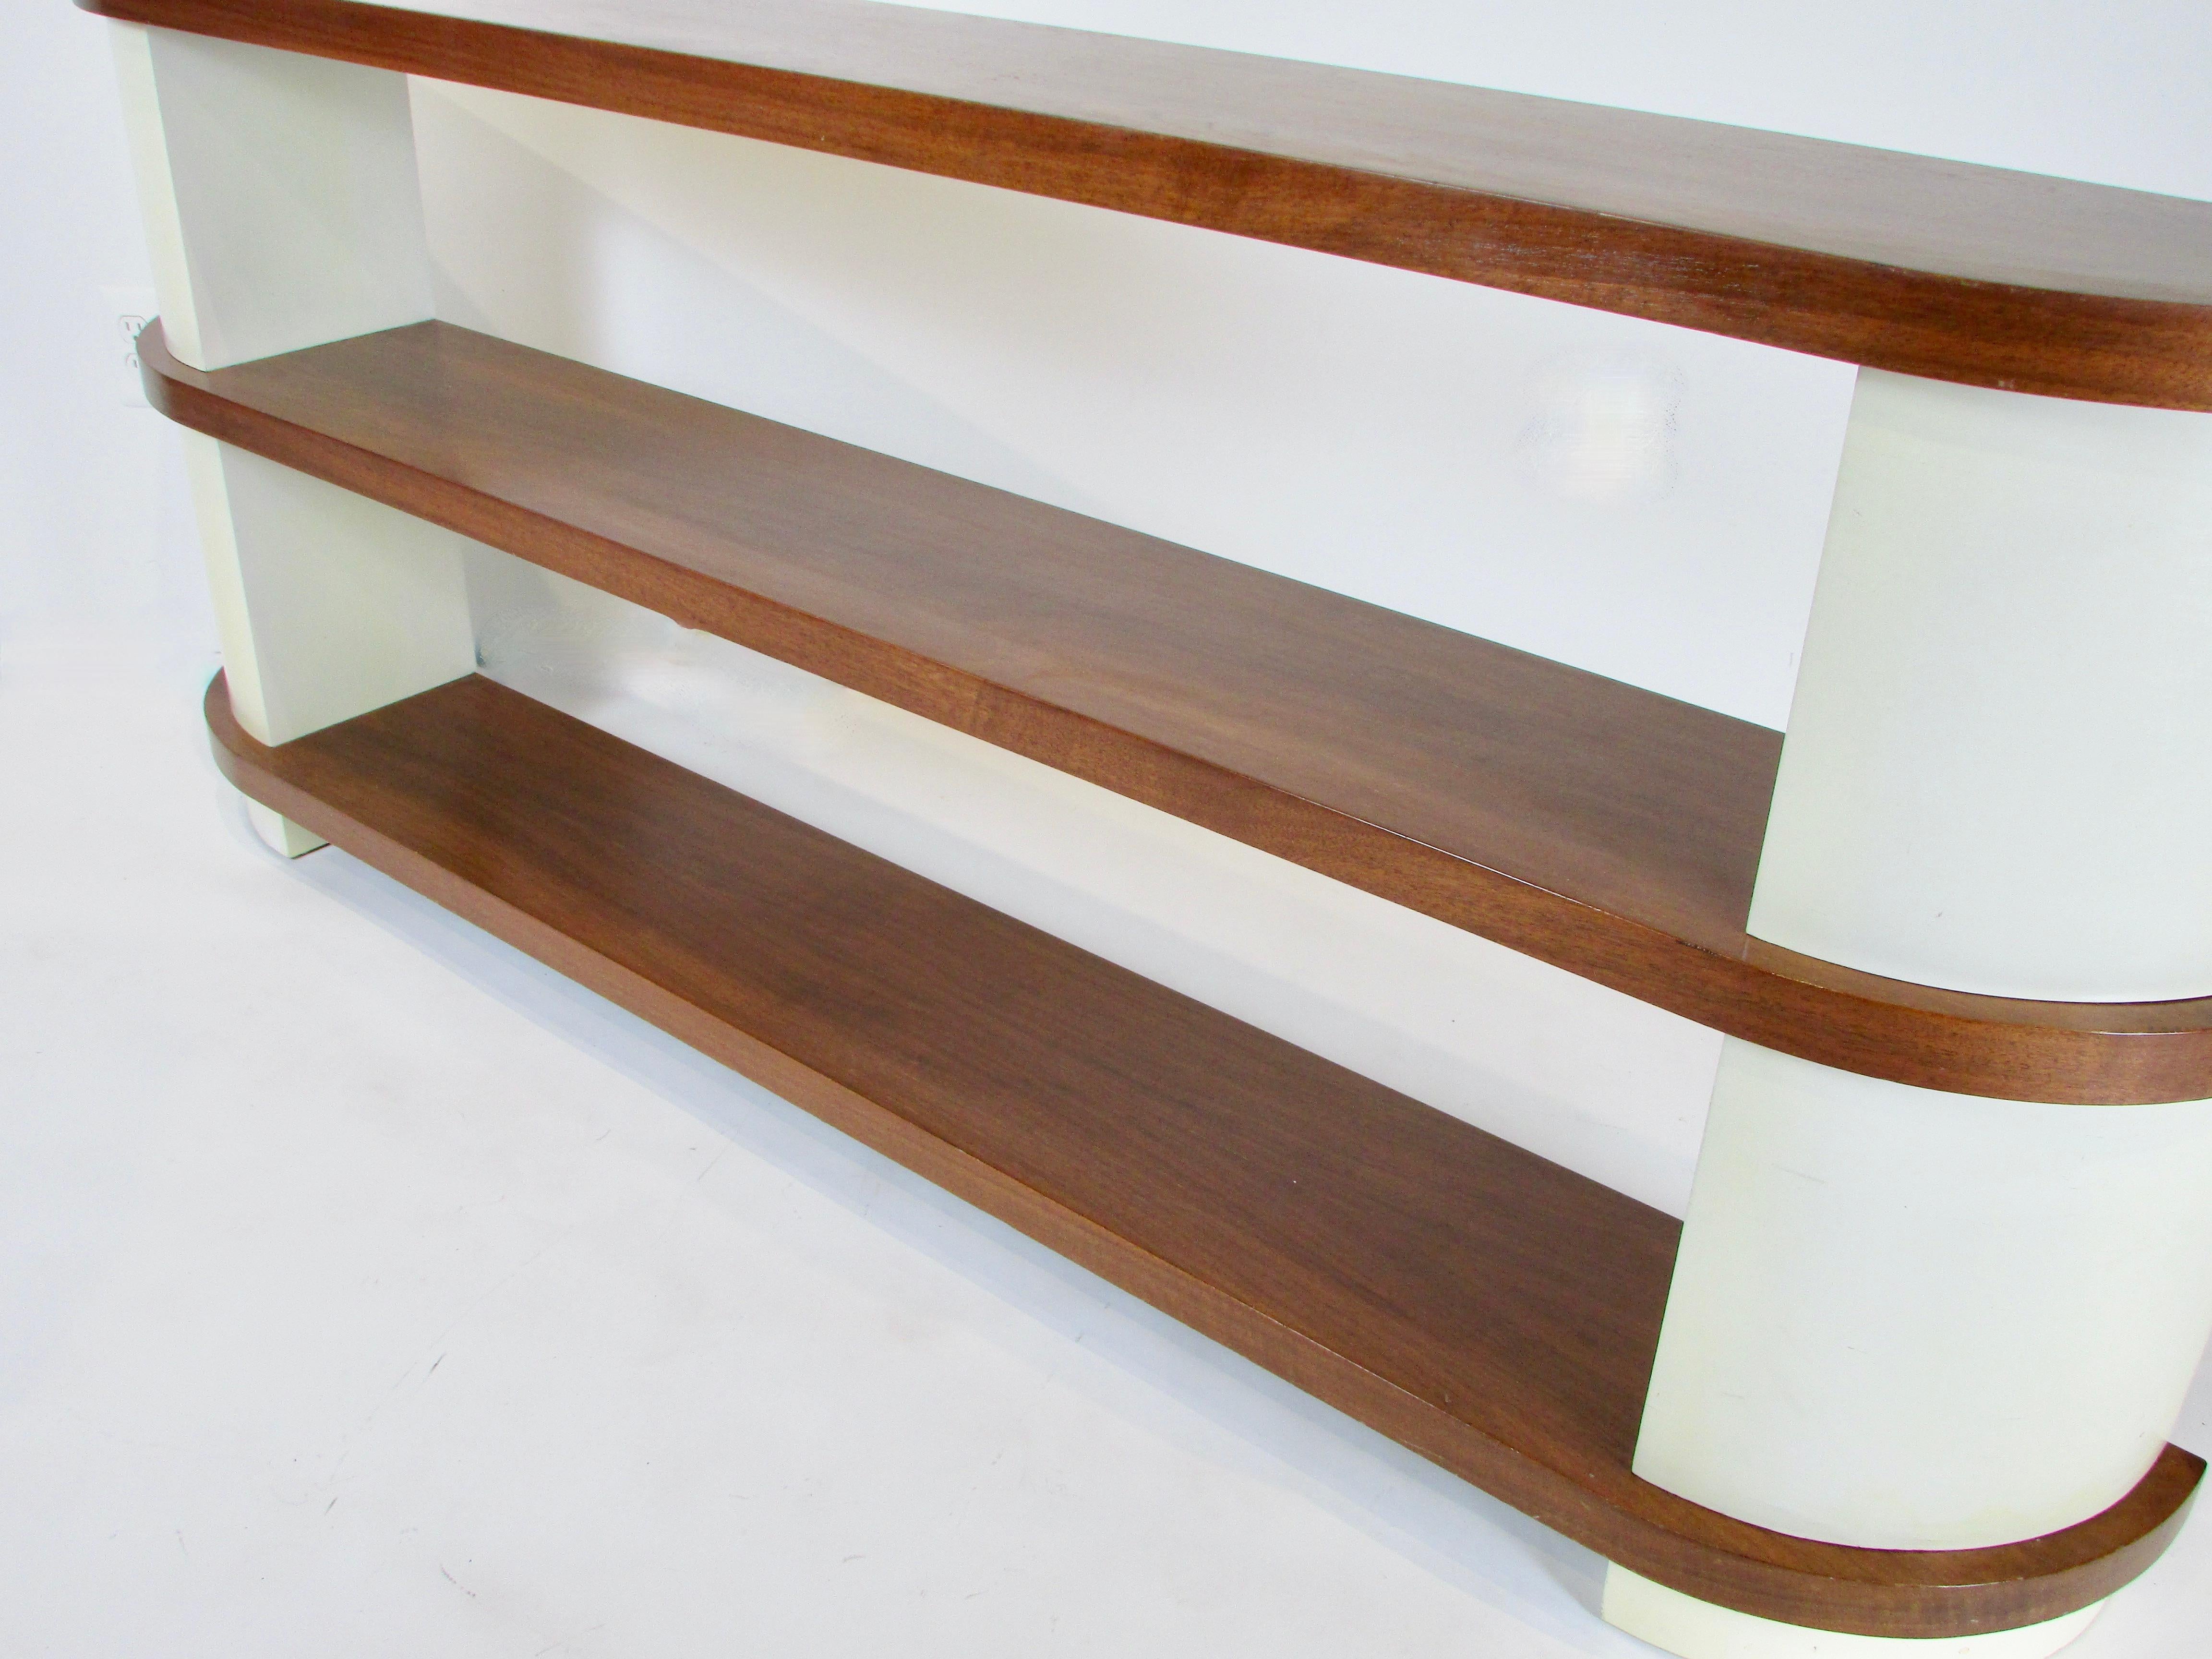 Wood Donald Deskey Attributed Art Deco Streamlined Moderne Console Entry Shelf Unit For Sale